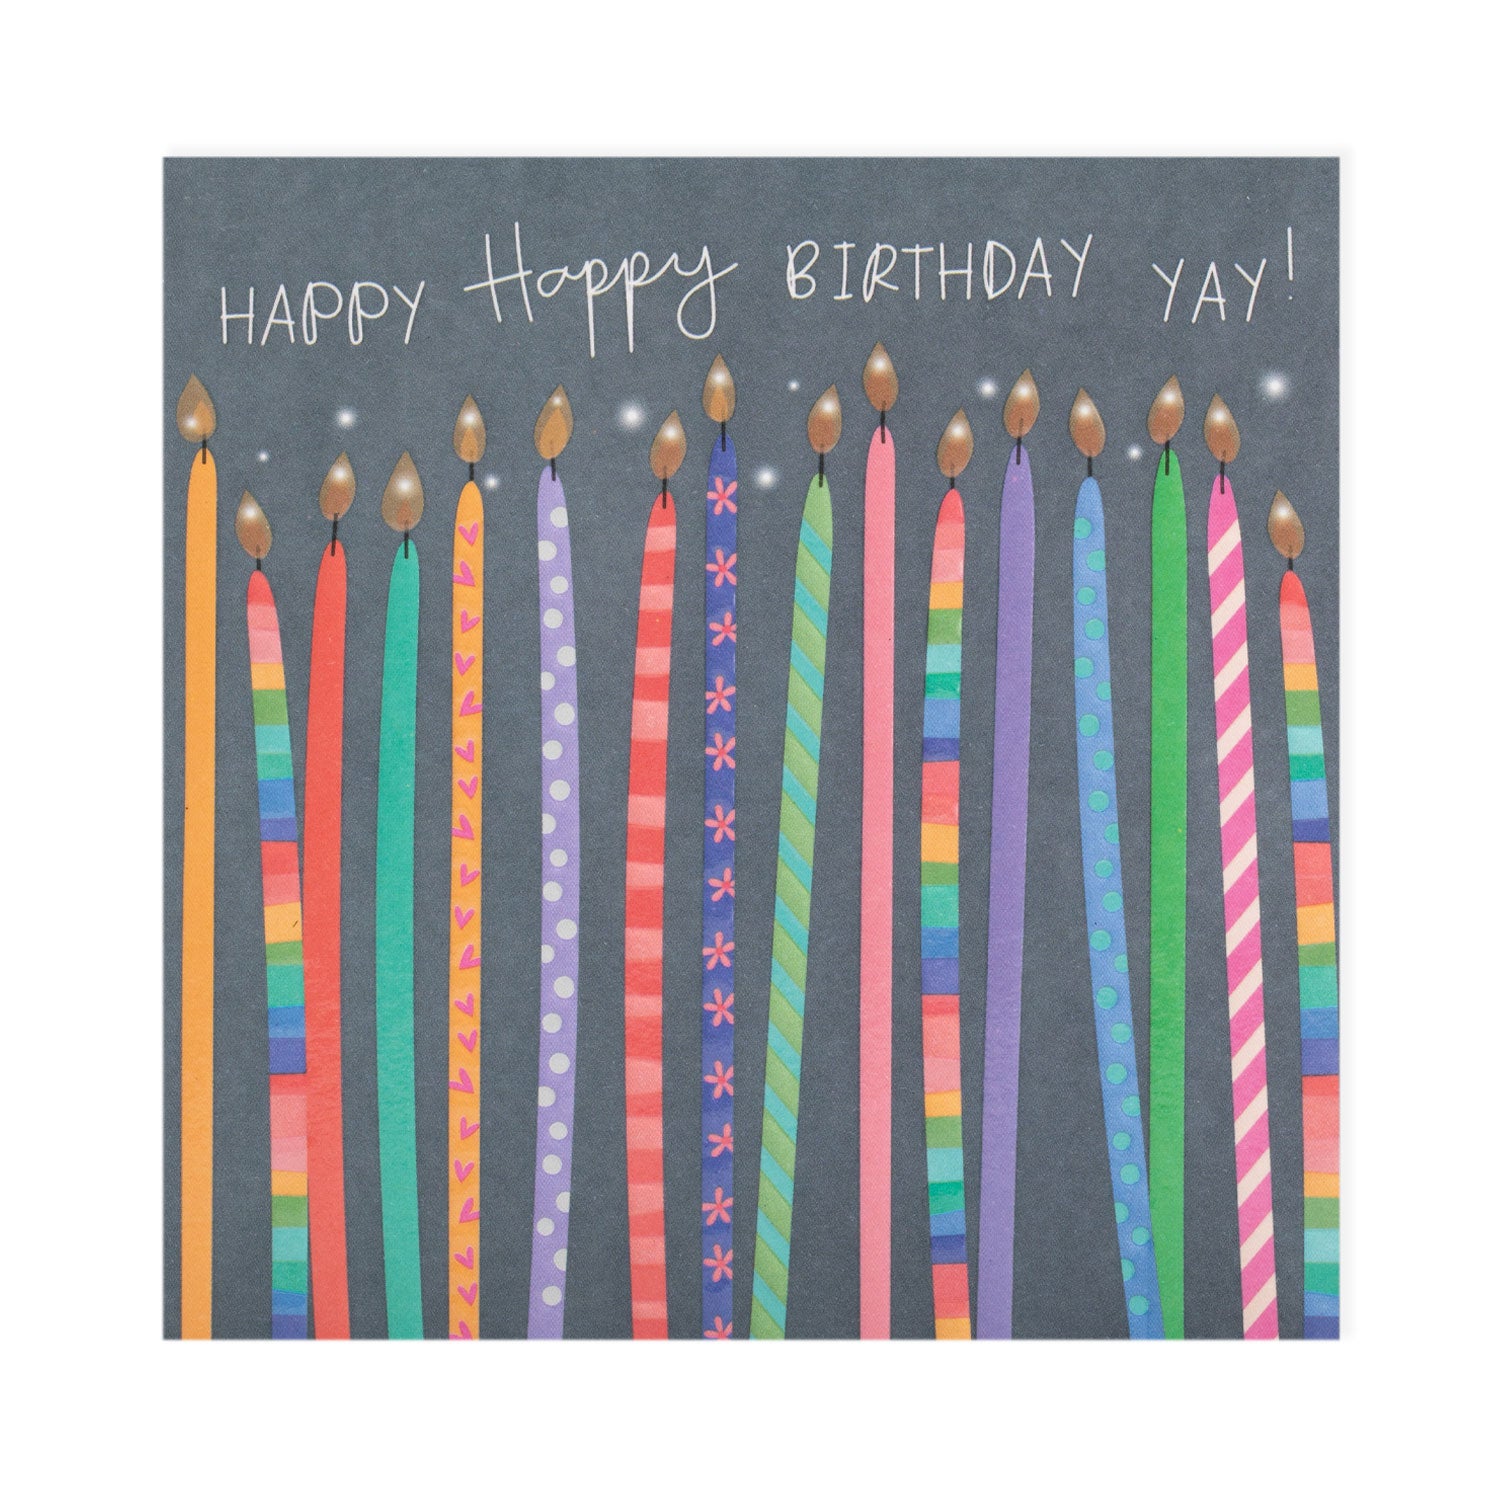 Happy Birthday Candles Card - Belly Button Designs